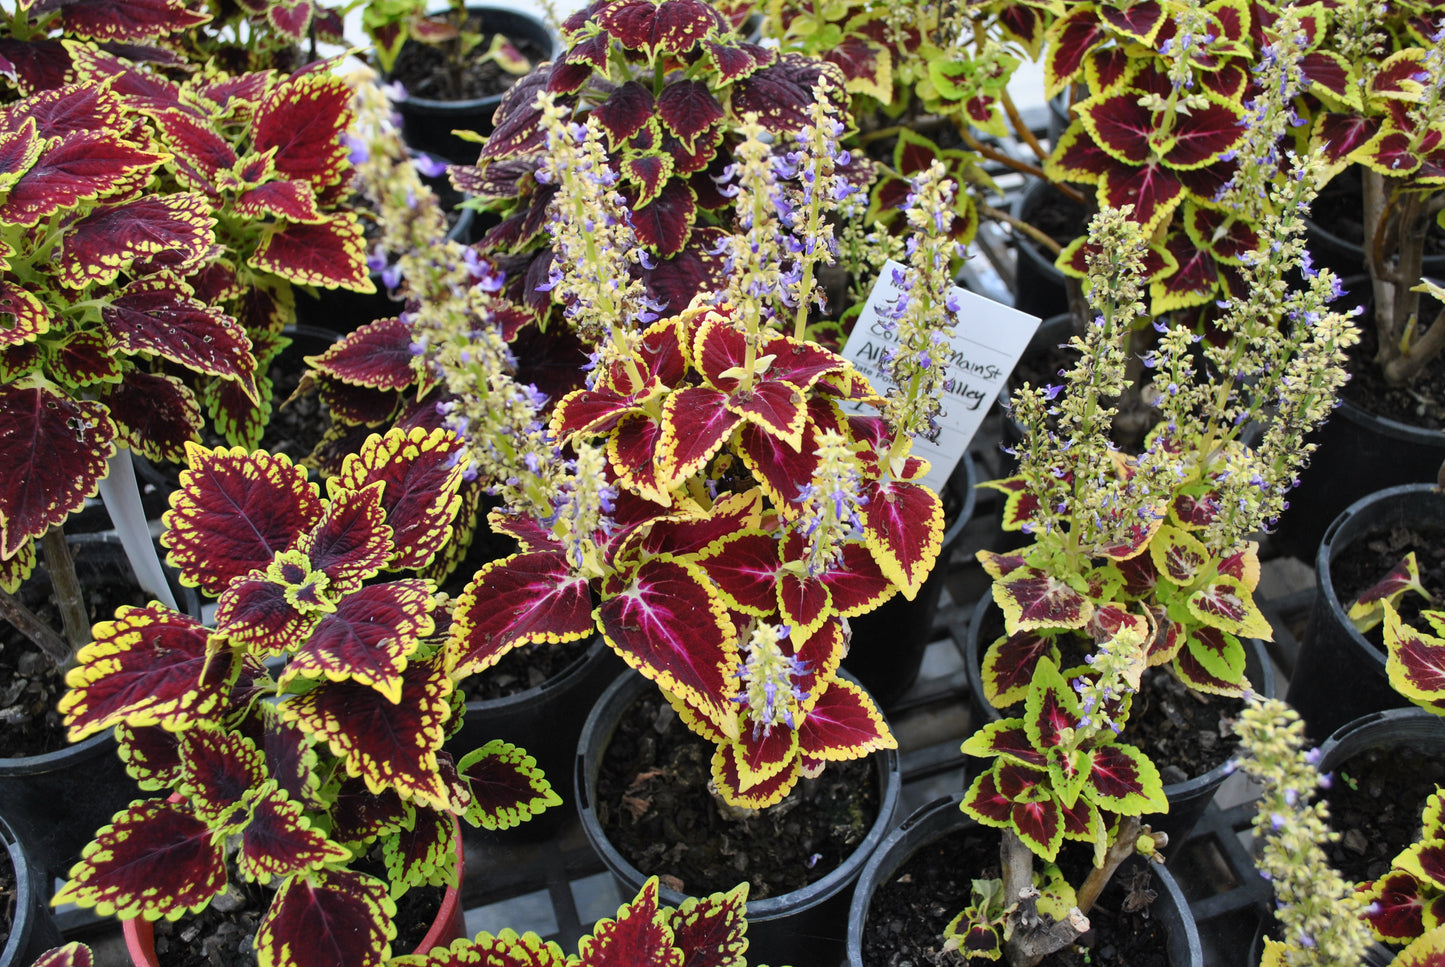 Colourful variety of Coleus plants with purple stemmed flowers and varying shades of red and green foliage